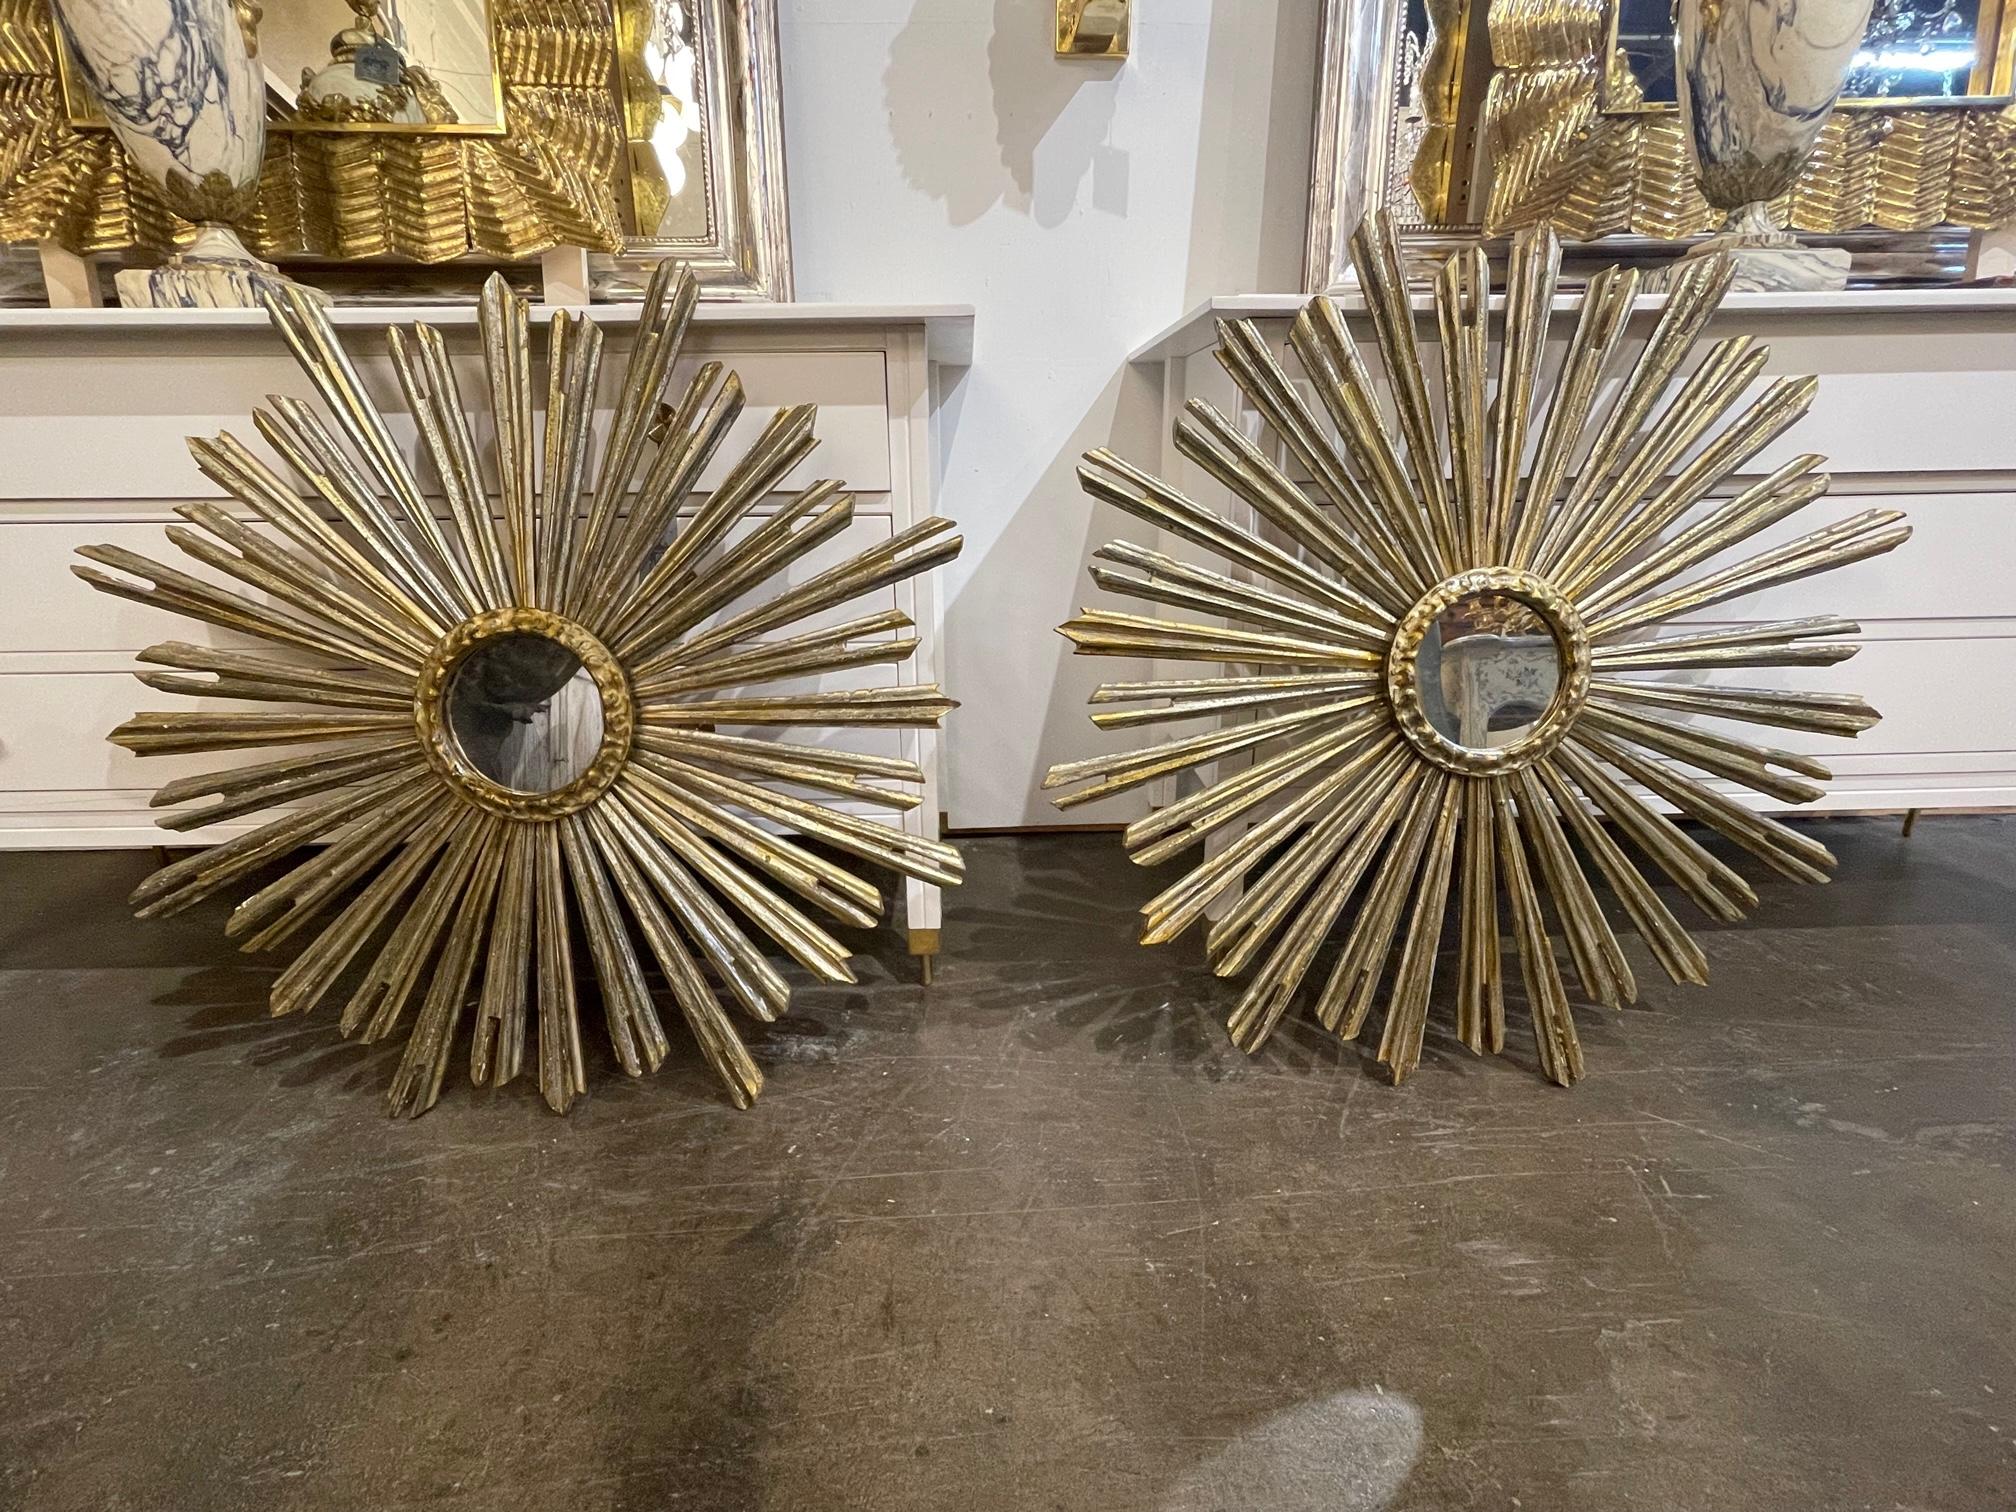 Large scale pair of Italian carved silver and gold sunbursts with a mirror in the center. A beautiful decorative element that makes a huge impact! Gorgeous!